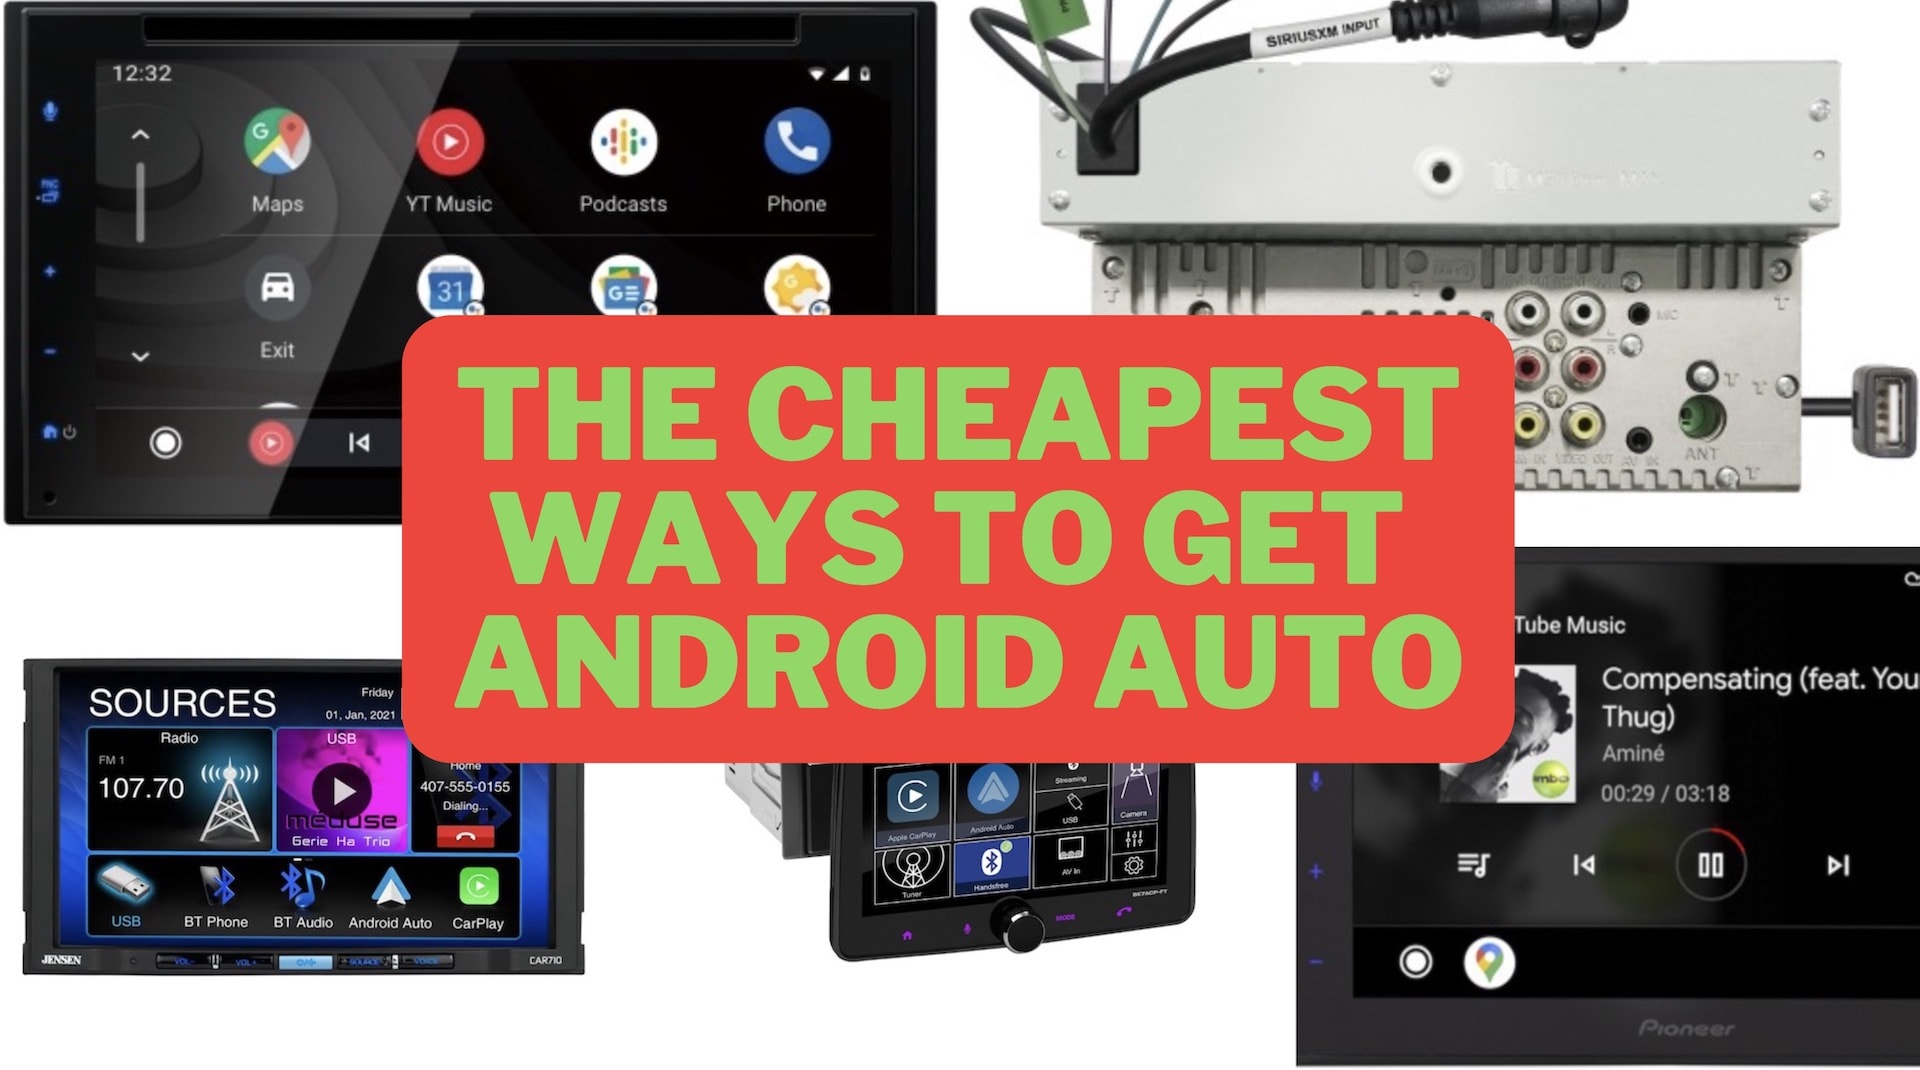 https://s1.cdn.autoevolution.com/images/news/top-5-cheapest-android-auto-head-units-210556_1.jpg